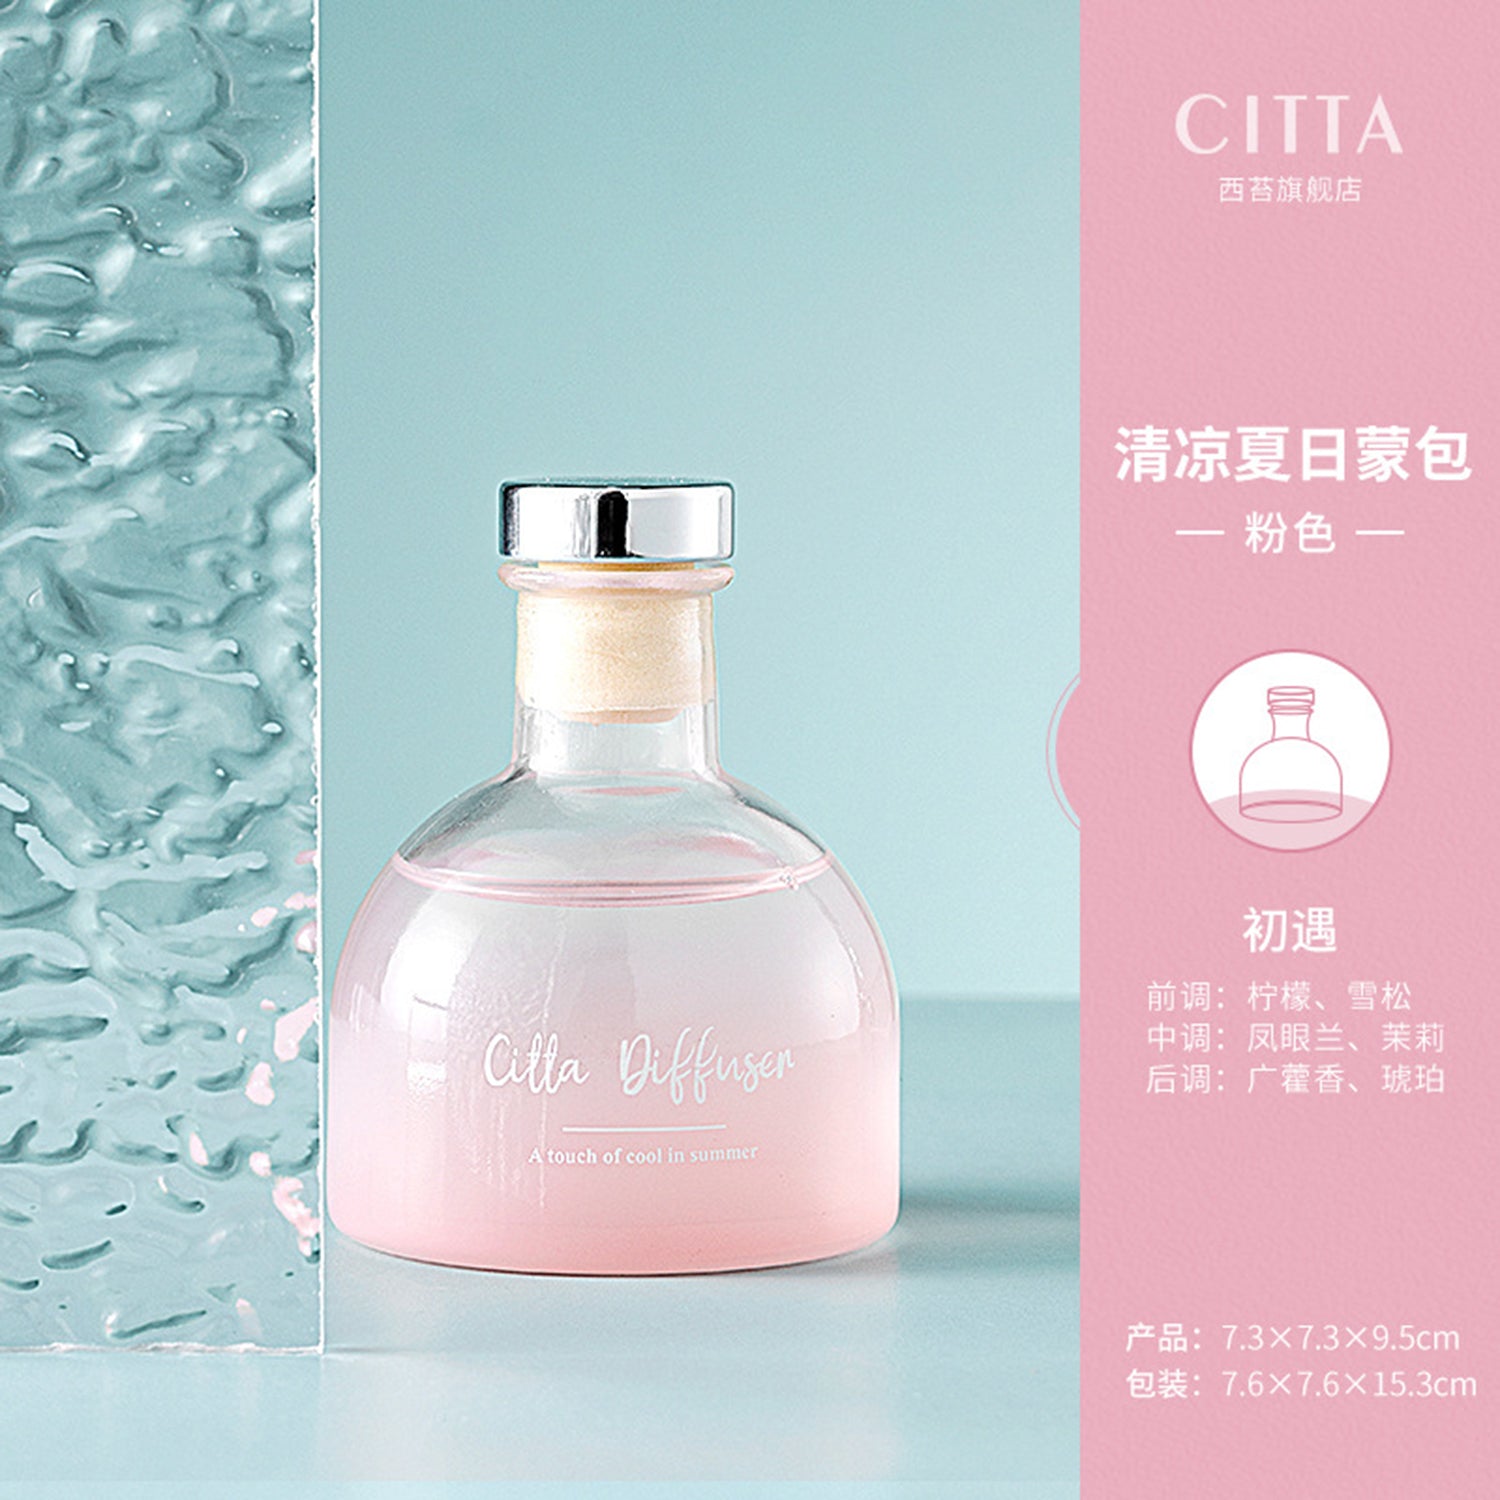 CITTA Cool Summer Series Reed Diffuser Aromatherapy 100ML Premium Essential Oil with Reed Stick Reed Diffuser CITTA Pink / Encounter 